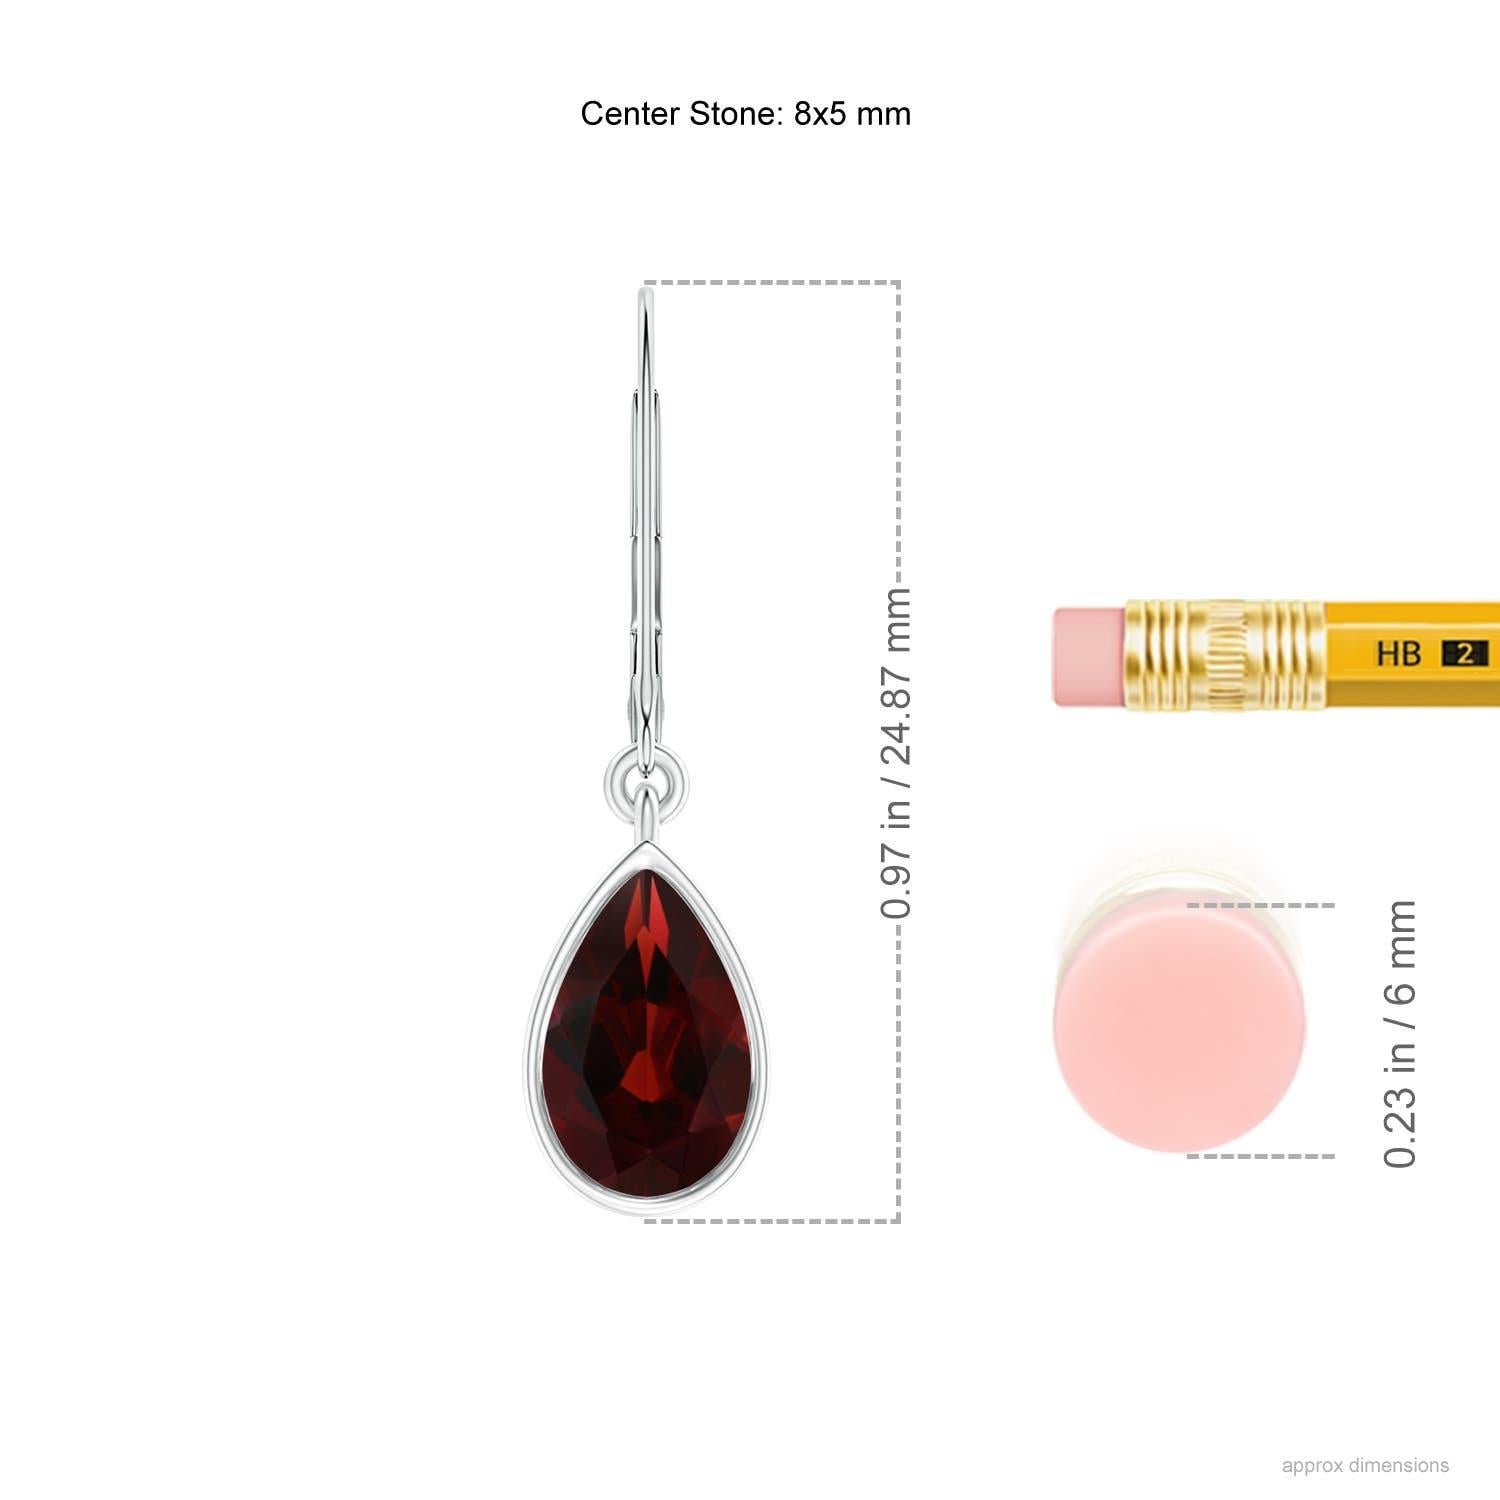 These classic garnet earrings exude sophisticated style. The gemstones are cut and faceted in a pear shape and look alluring in their intense reddish brown. They are bezel set in platinum and secured to lever backs for a fascinating drop look.